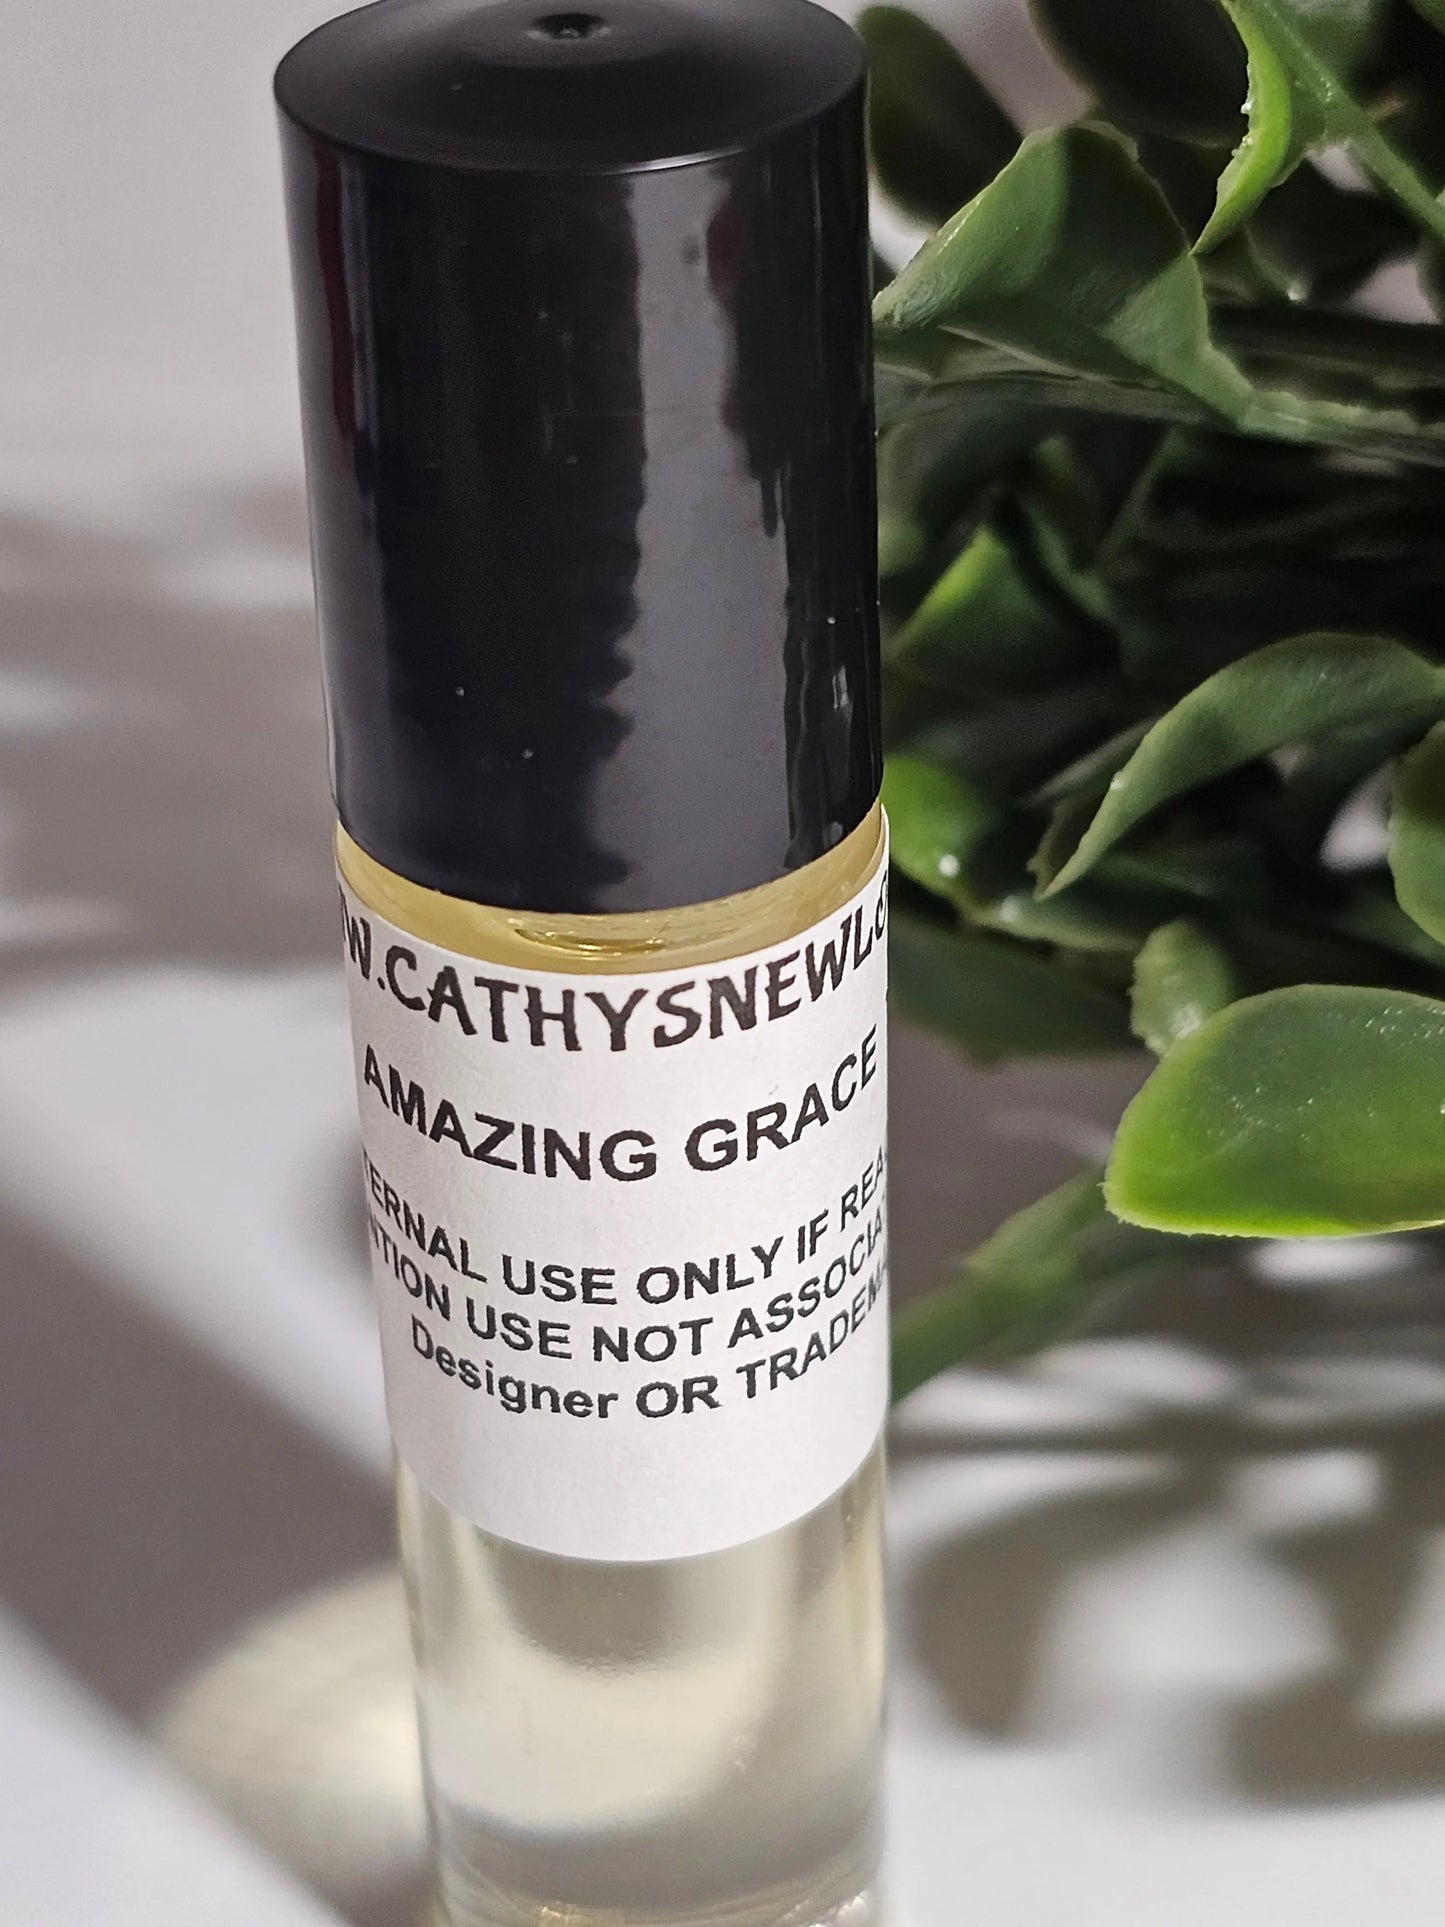 Compare to aroma AMAZING GRACE (W) by Philosophy ® TPYE Cathy,s new look